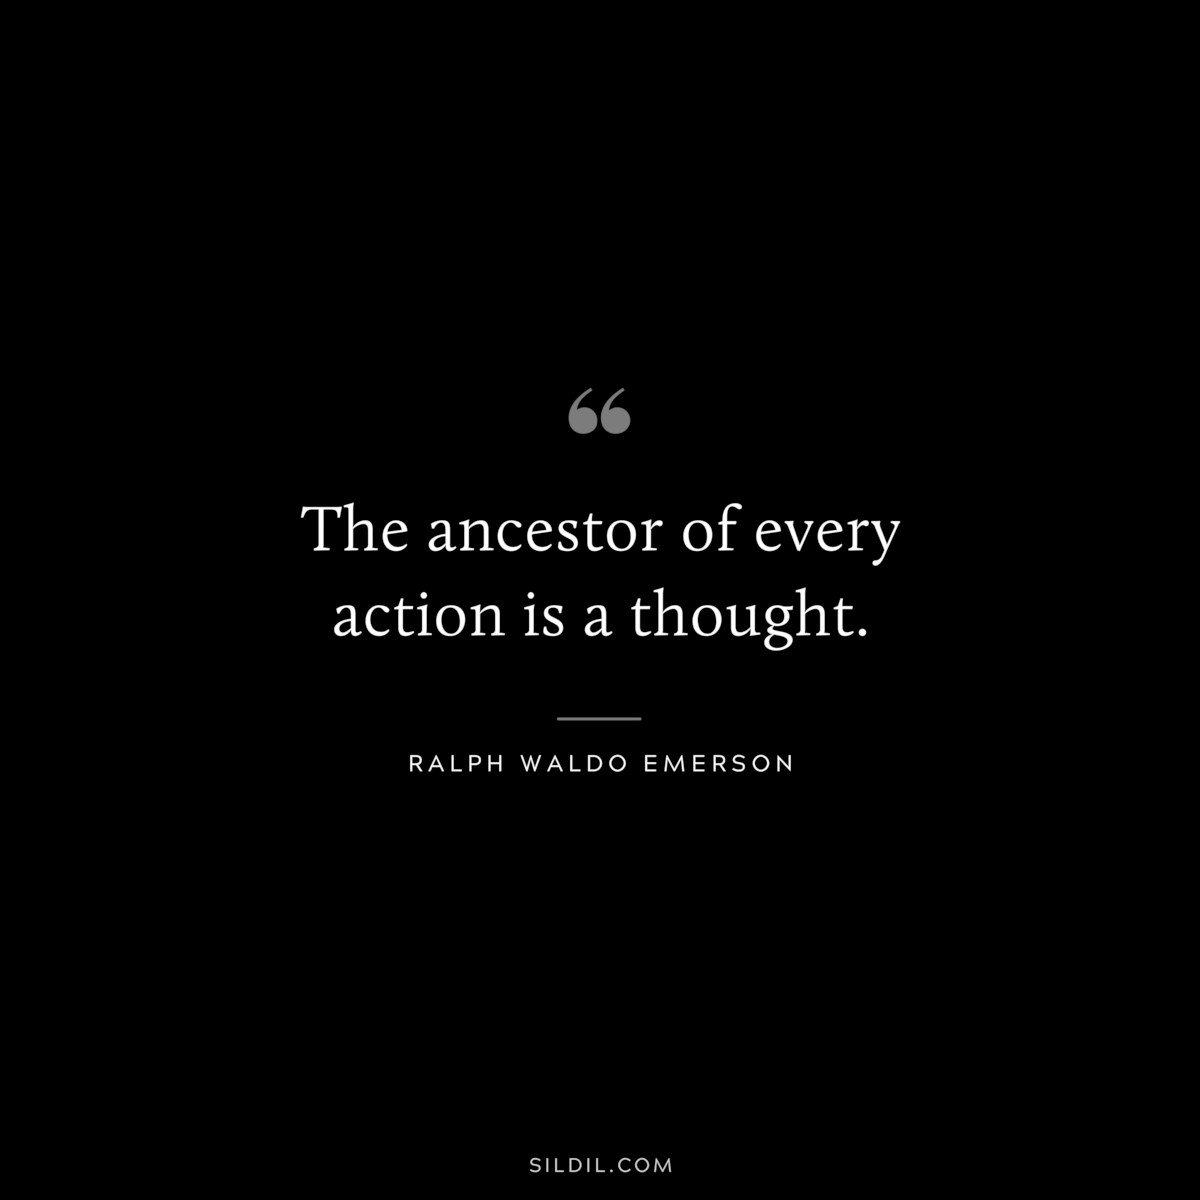 The ancestor of every action is a thought. — Ralph Waldo Emerson